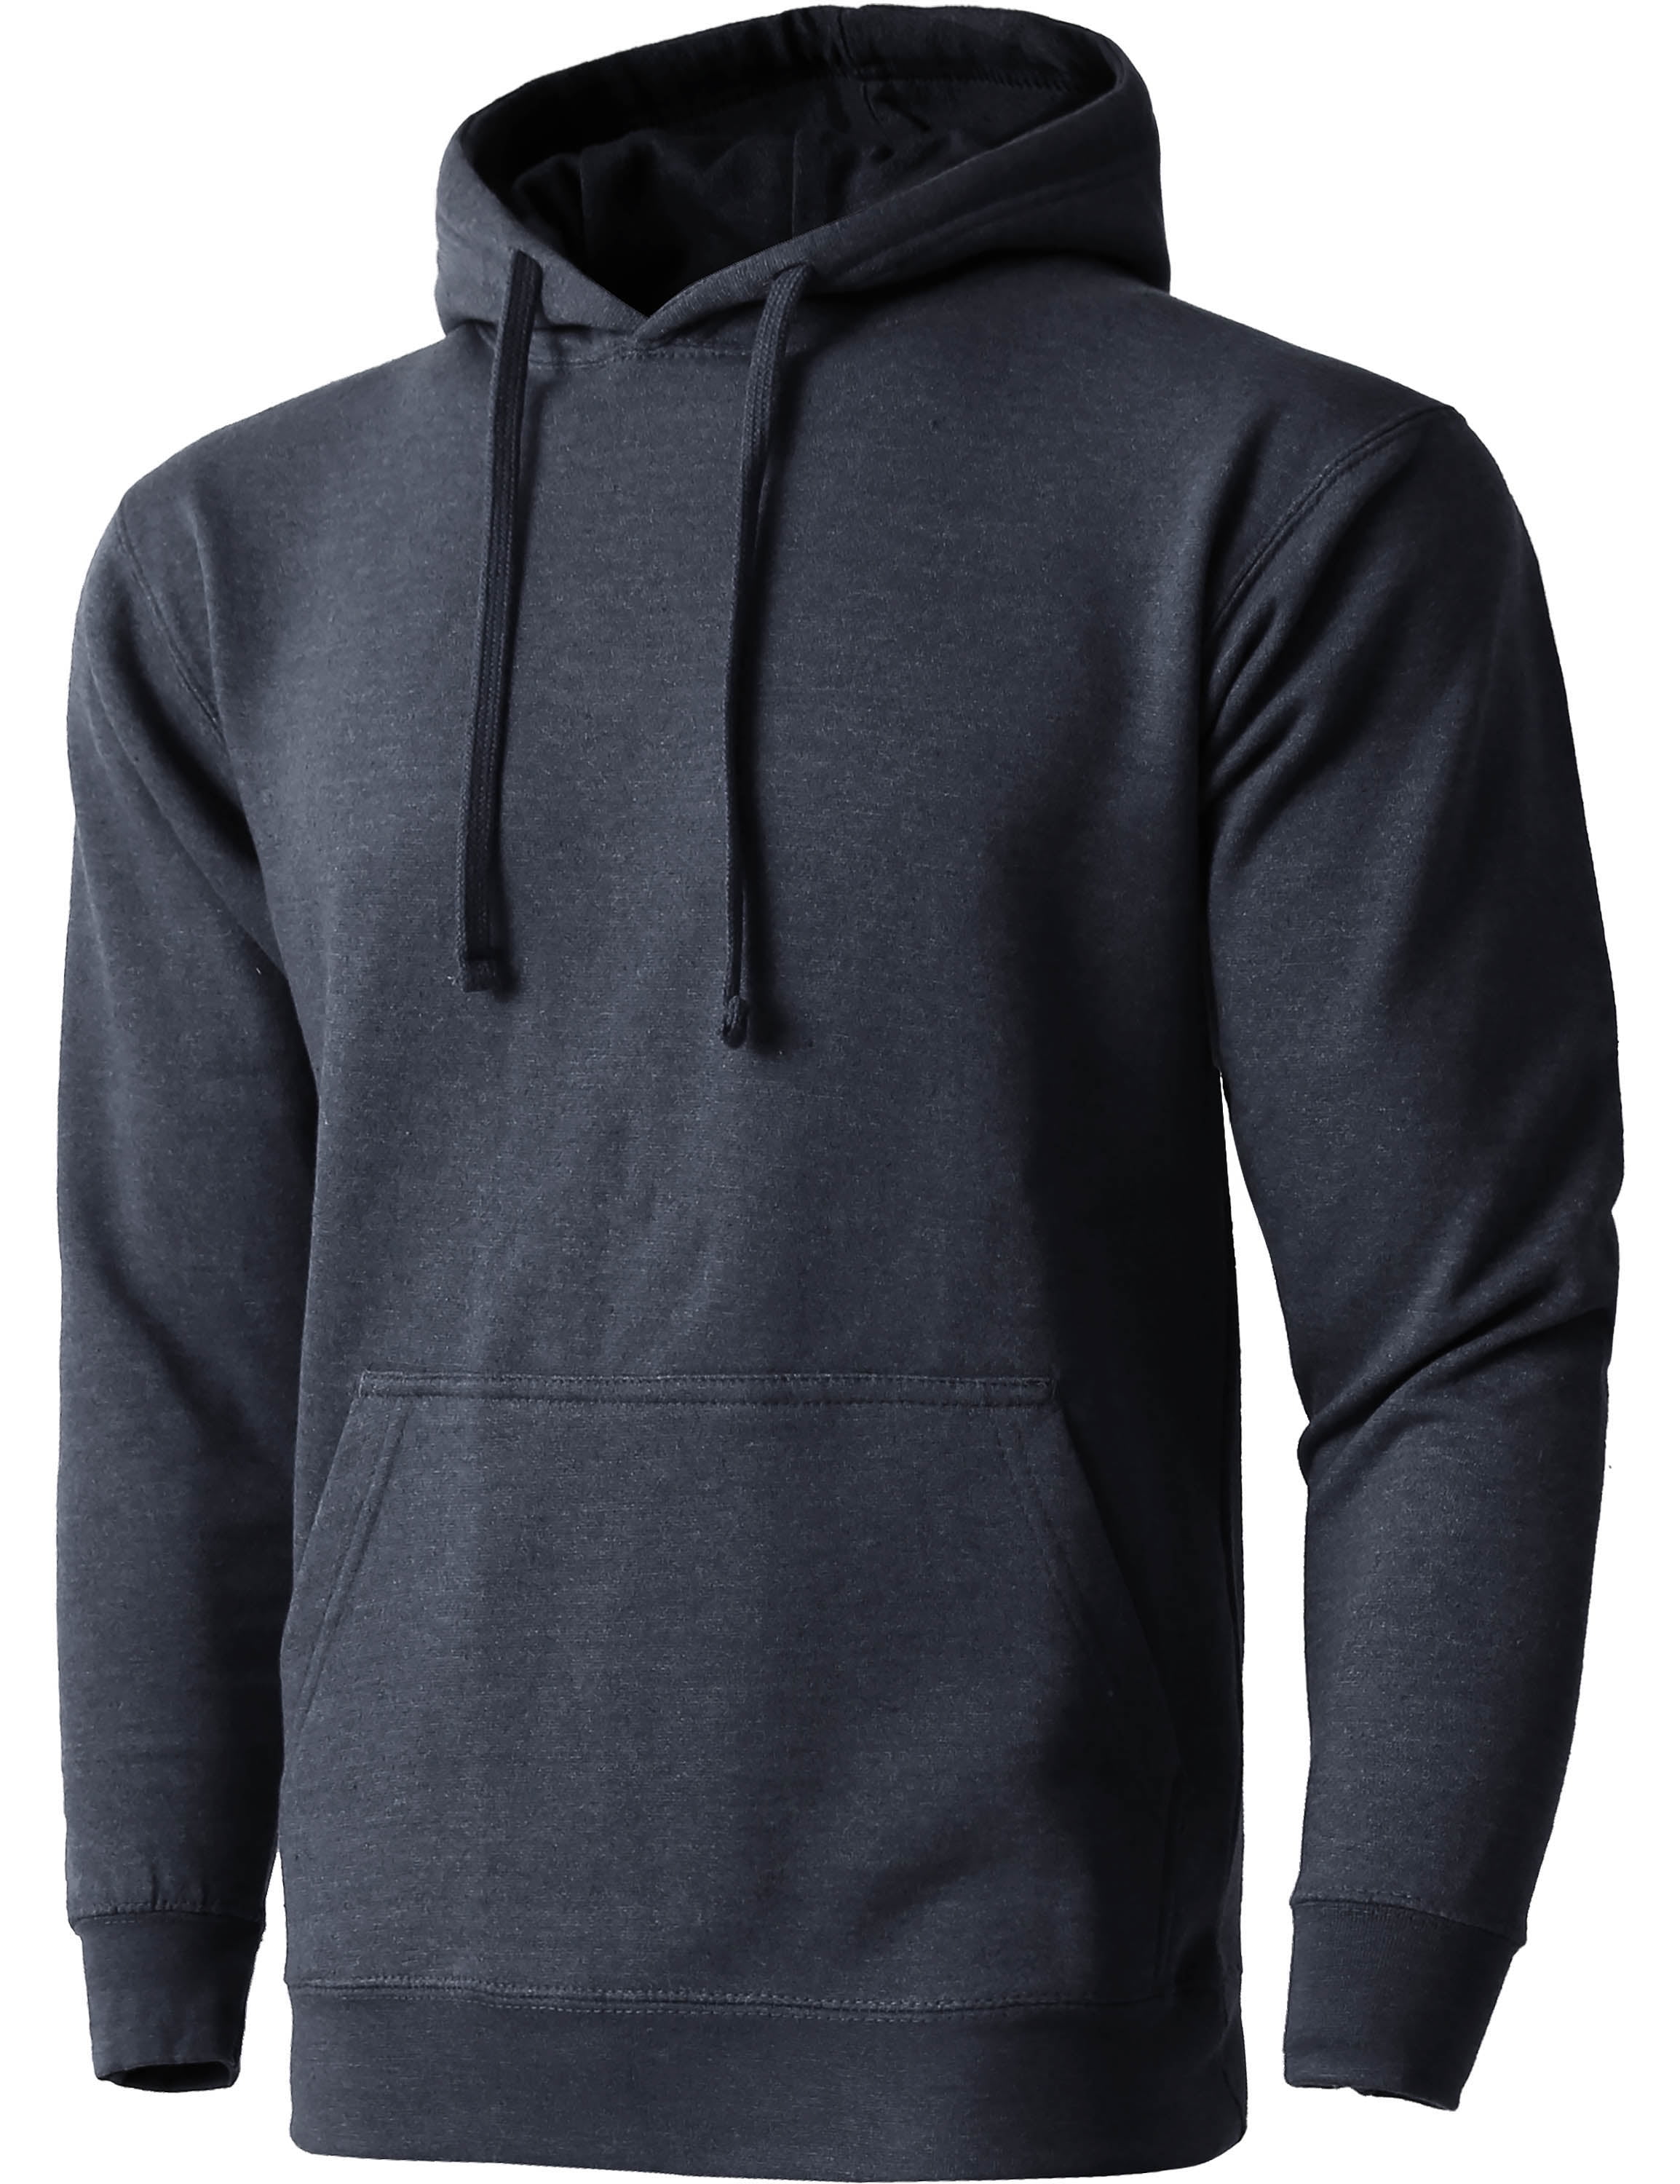 Hat and Beyond - Men's Casual Pullover Hoodie Heavyweight Long Sleeve ...